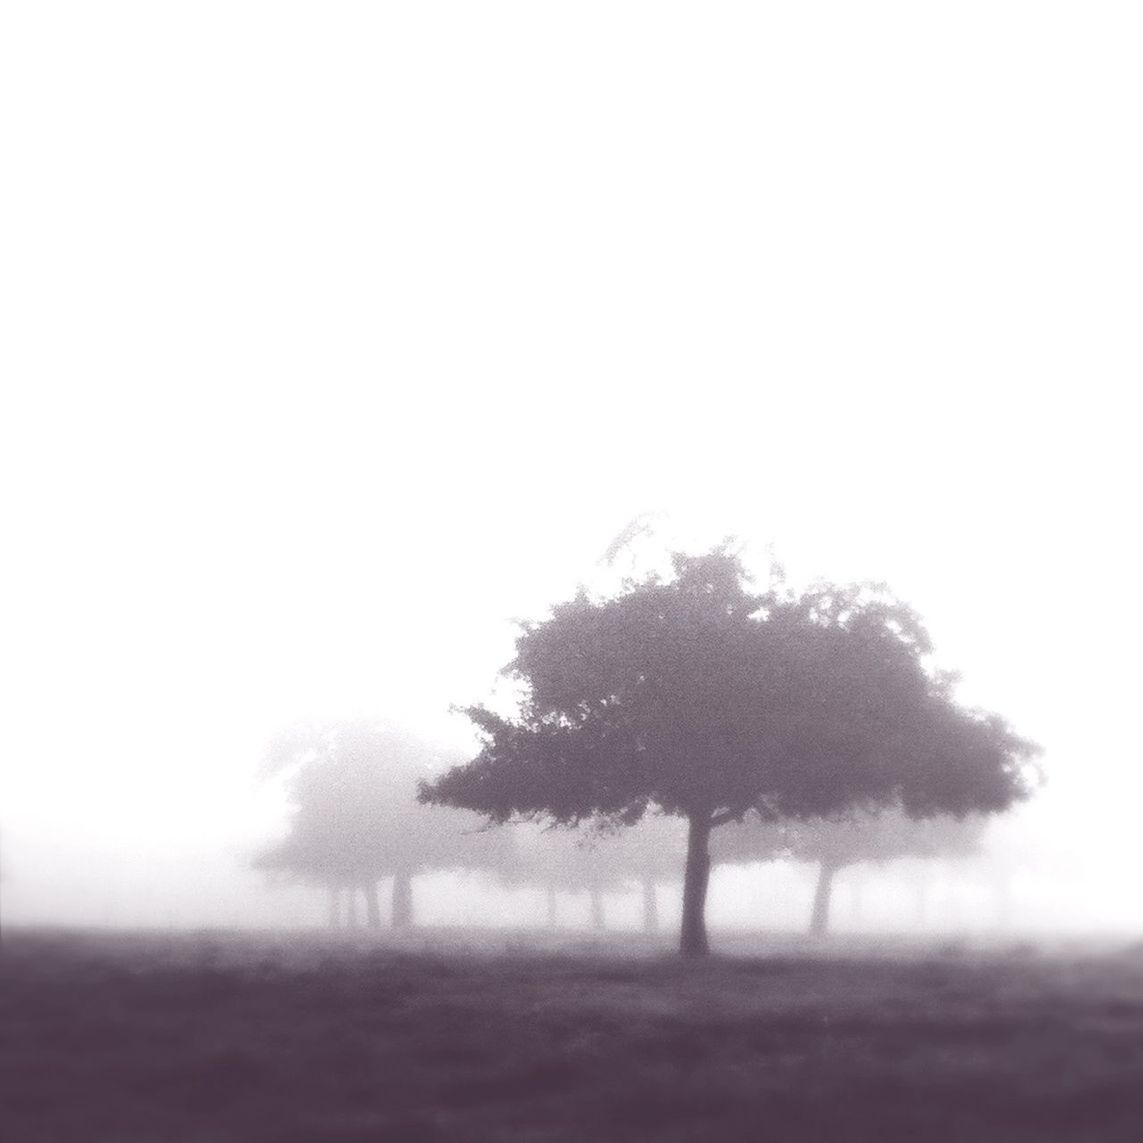 TREES IN FOGGY WEATHER